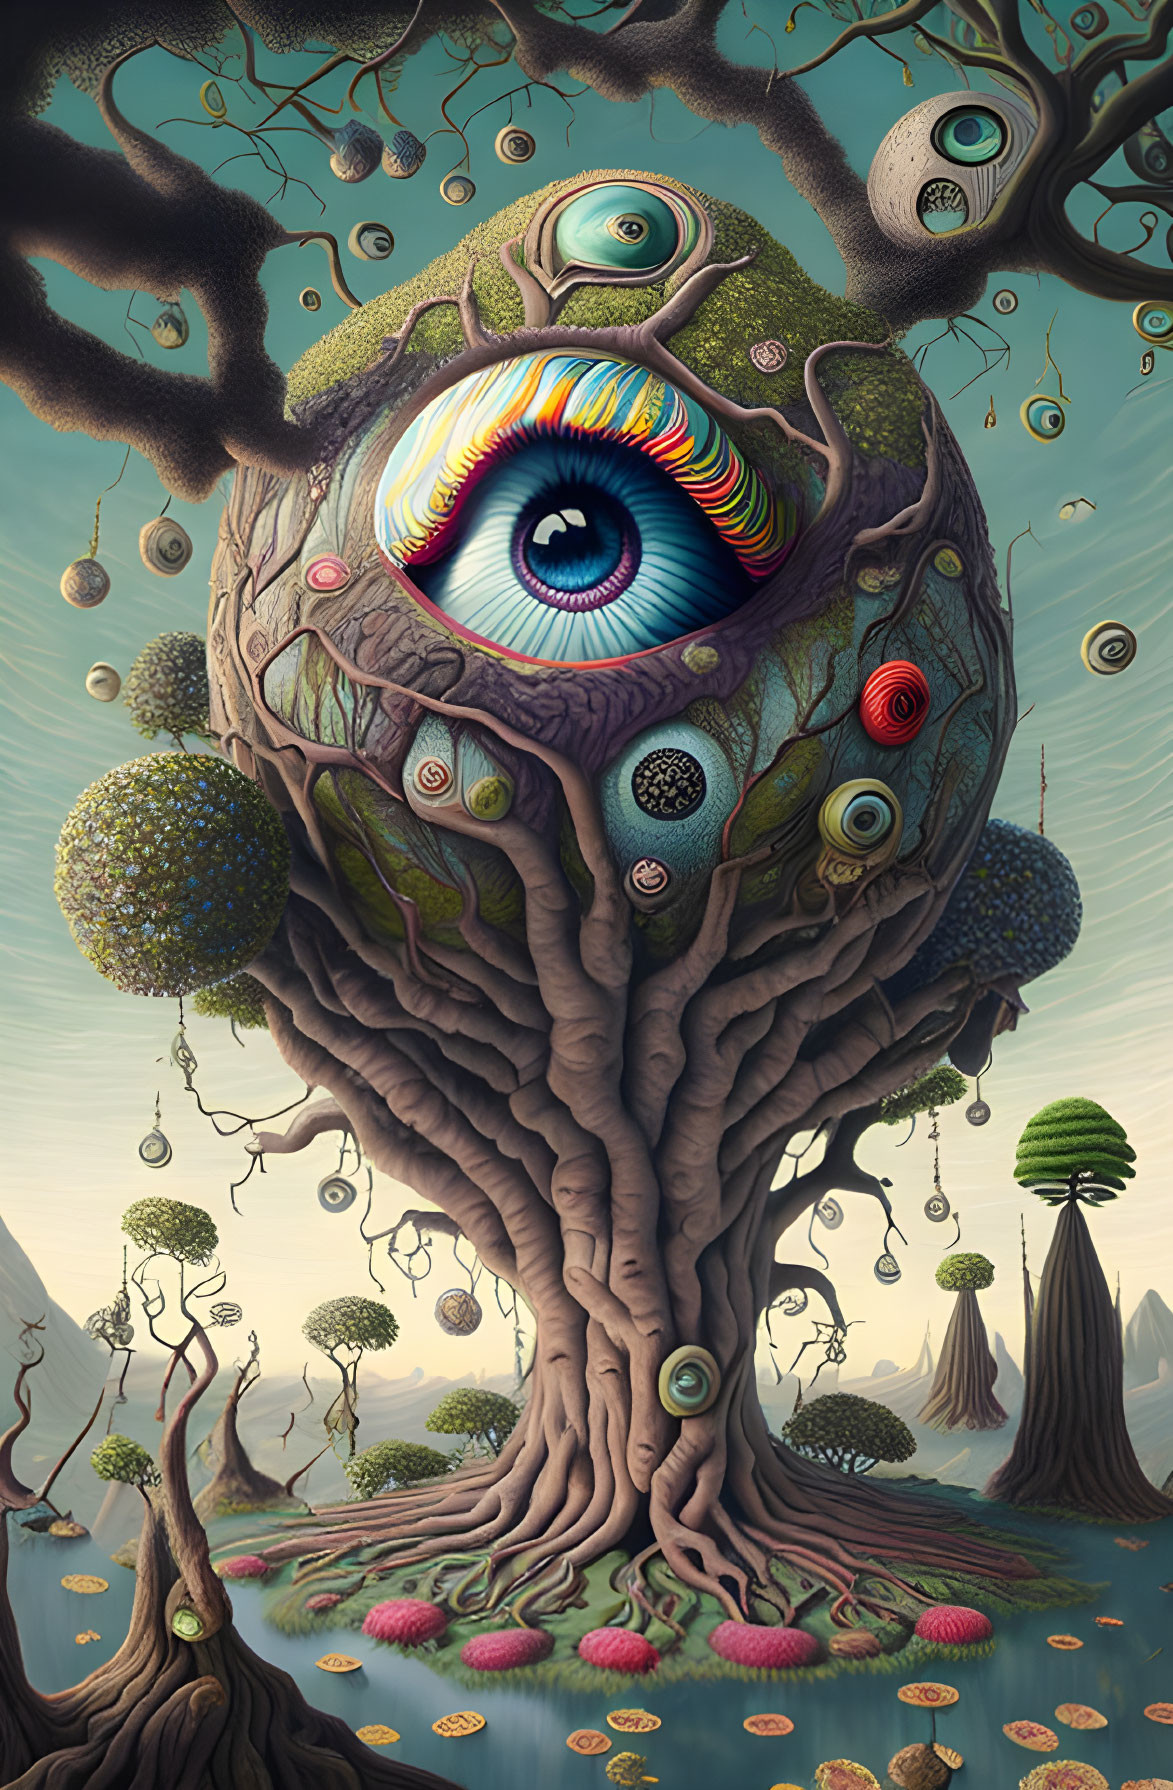 Surreal Tree Artwork with Large Eye and Whimsical Landscape